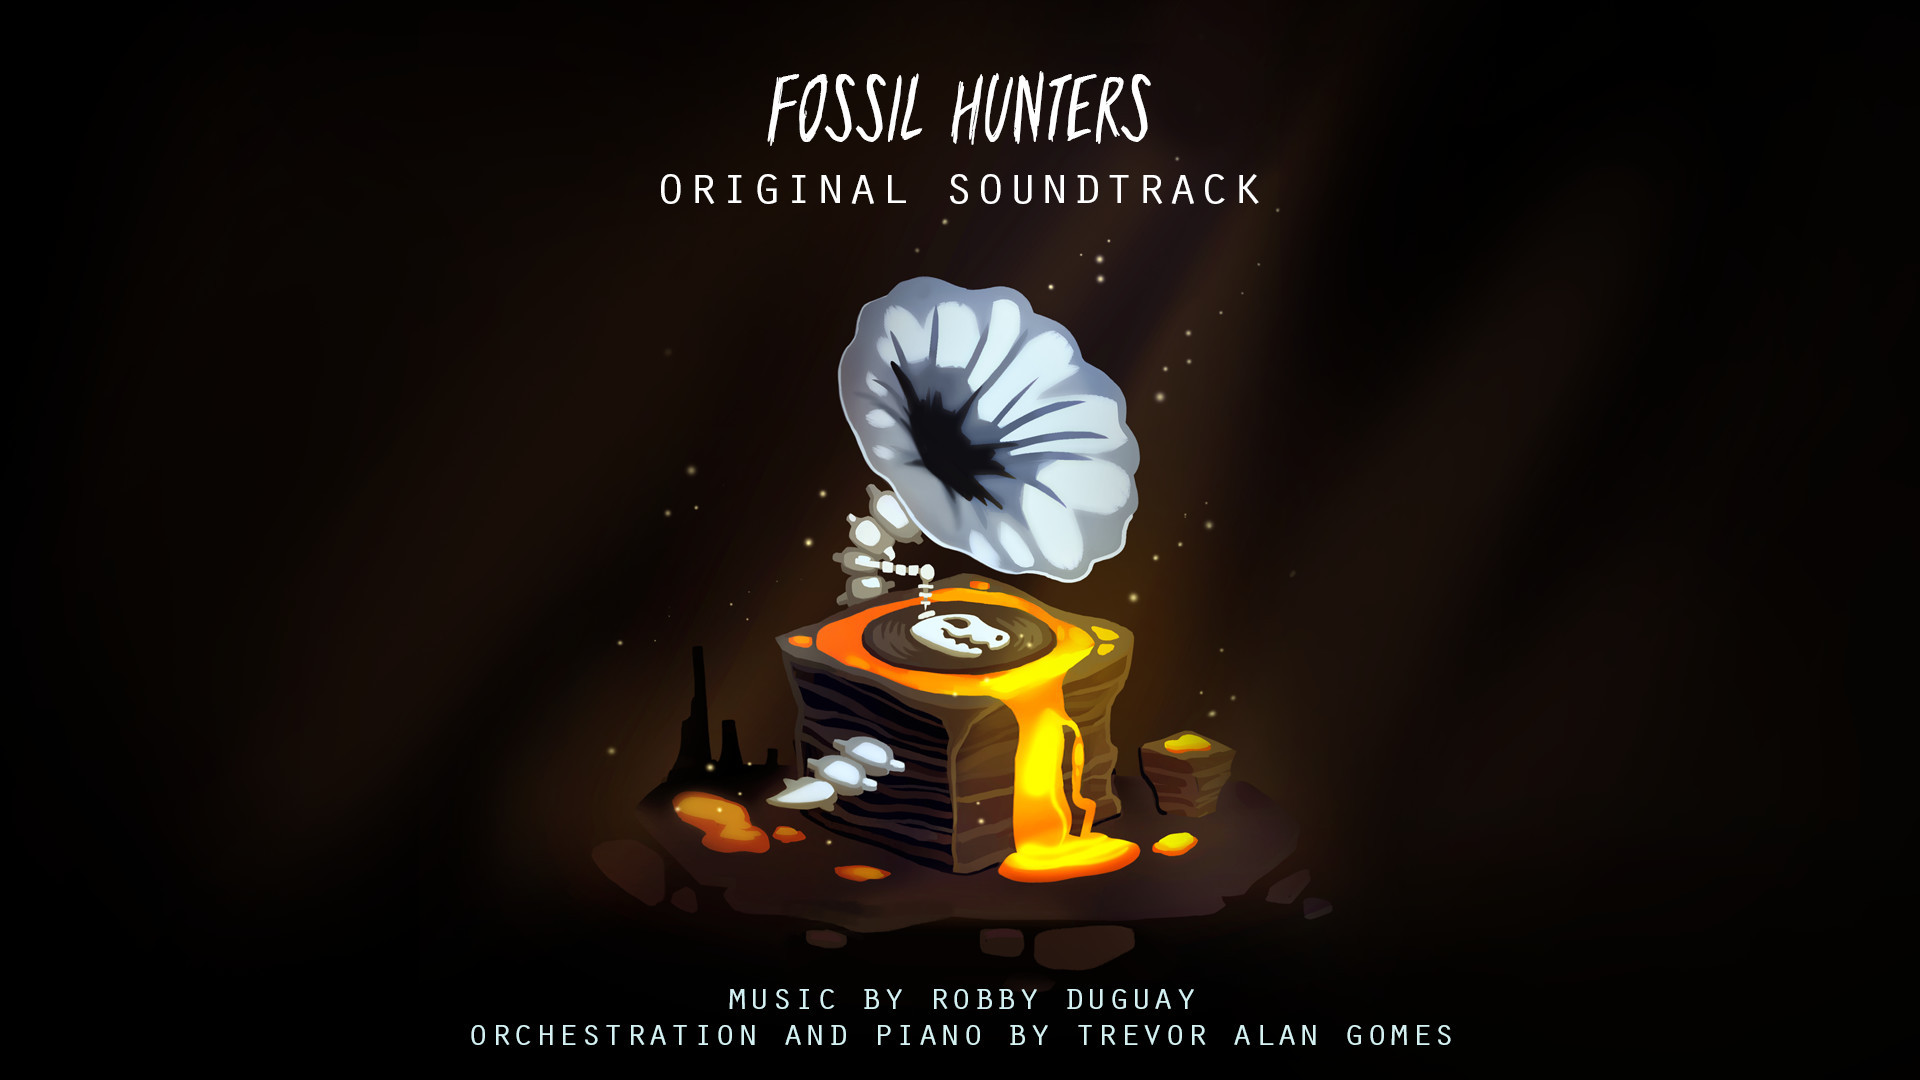 Fossil Hunters - Soundtrack Featured Screenshot #1